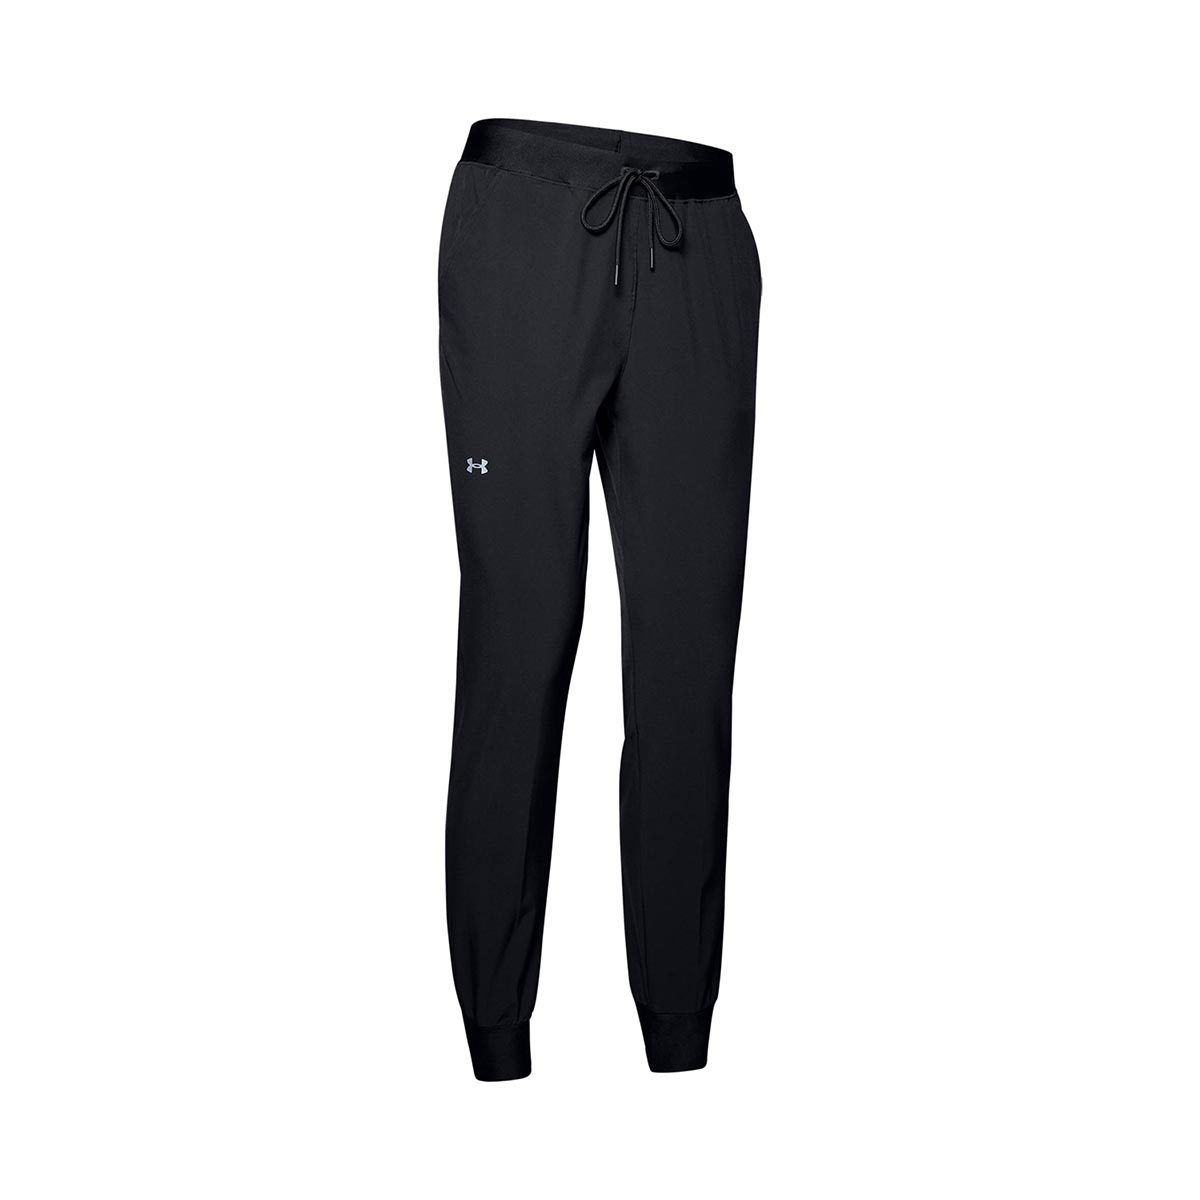 UNDER ARMOUR - ARMOUR SPORT WOVEN PANT